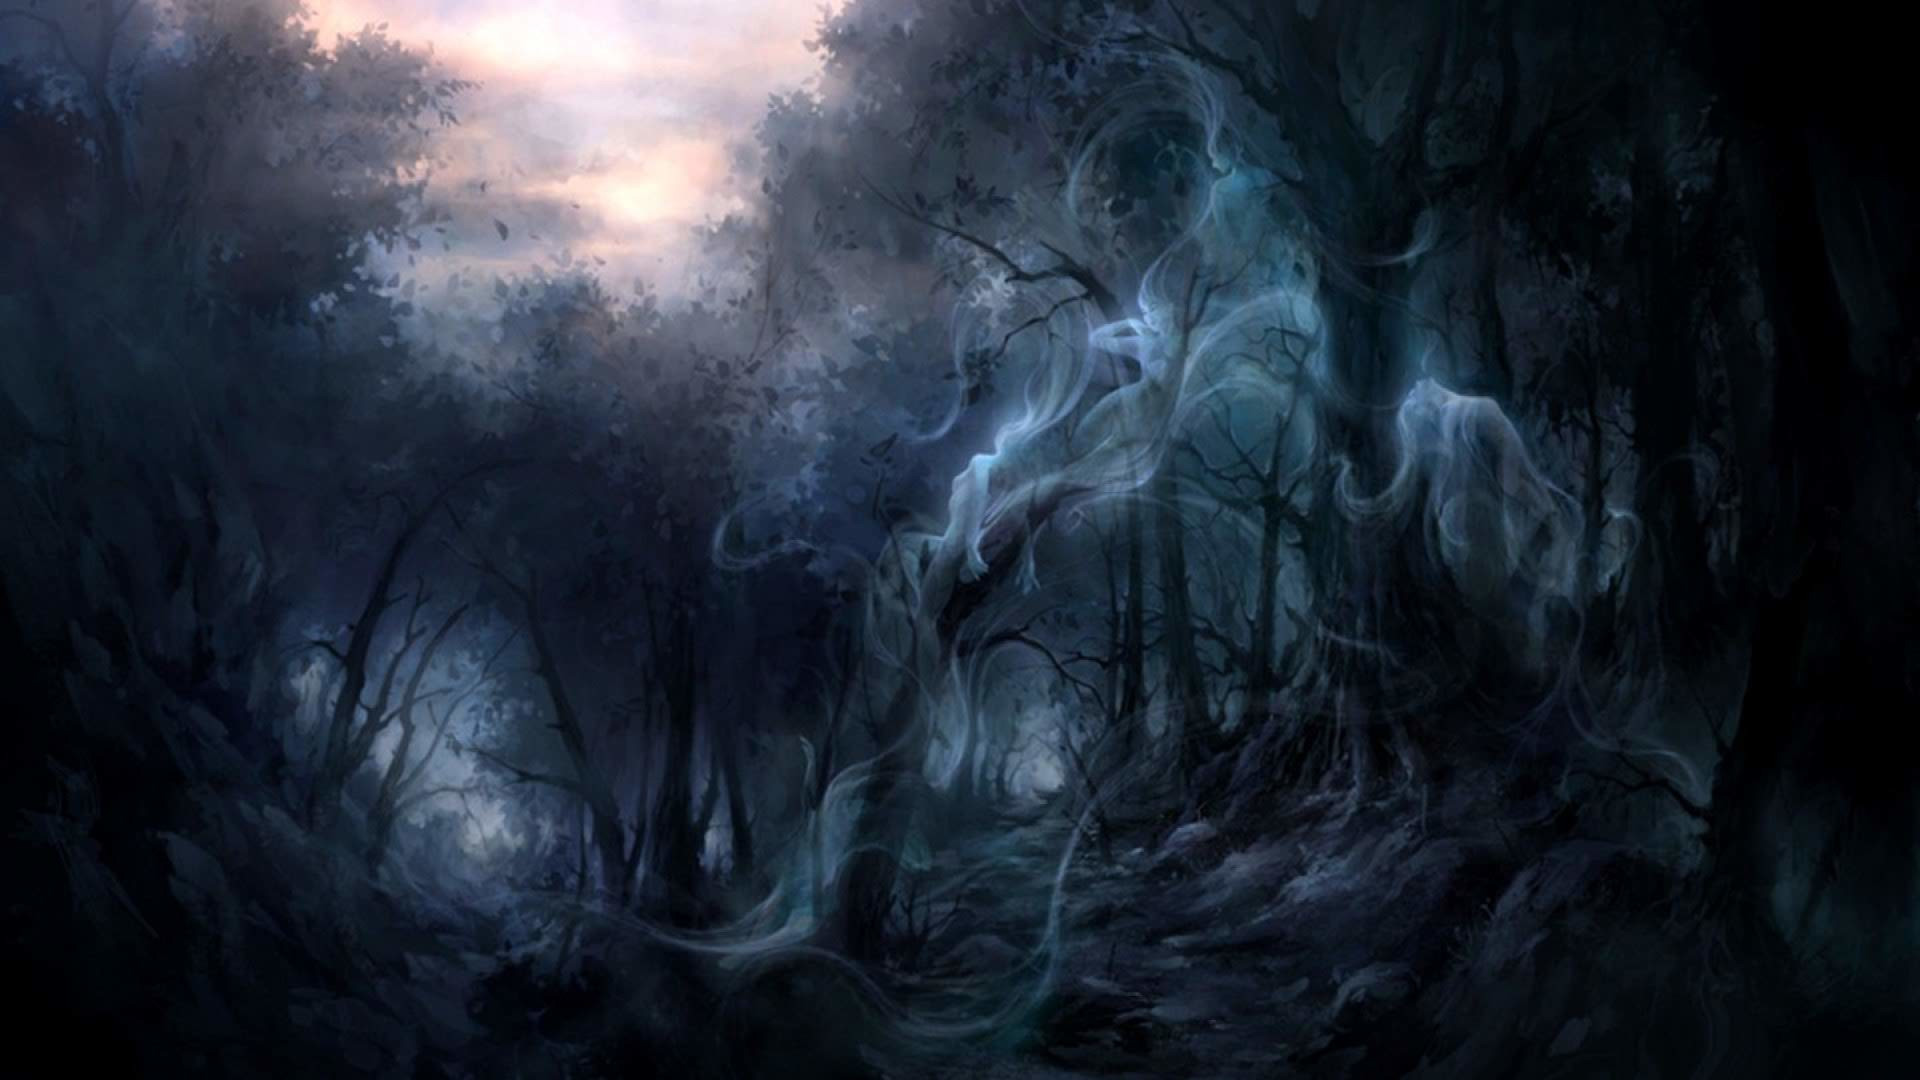 1920x1080 ... Attachment Page). This Enchanted forest Best High Definition Wallpapers  ...